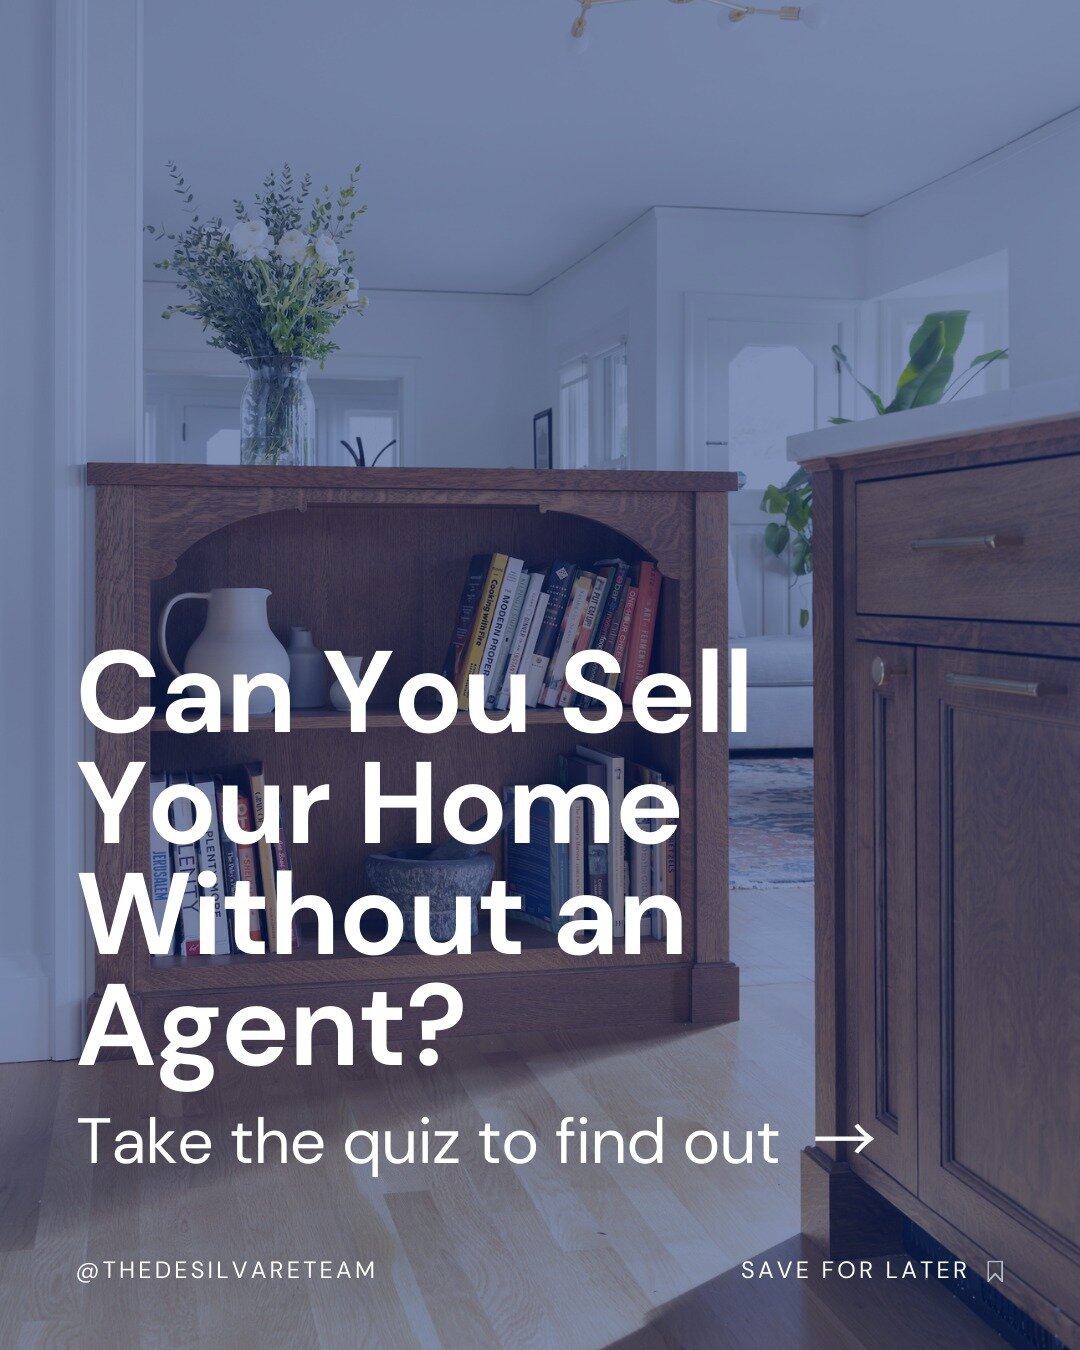 Are you considering selling your home without an agent? ⁠
⁠
It's a big decision that has lots of pros and cons to consider. And like all sellers, you want the best price and experience possible. ⁠
⁠
But the truth is, selling your home without an agen